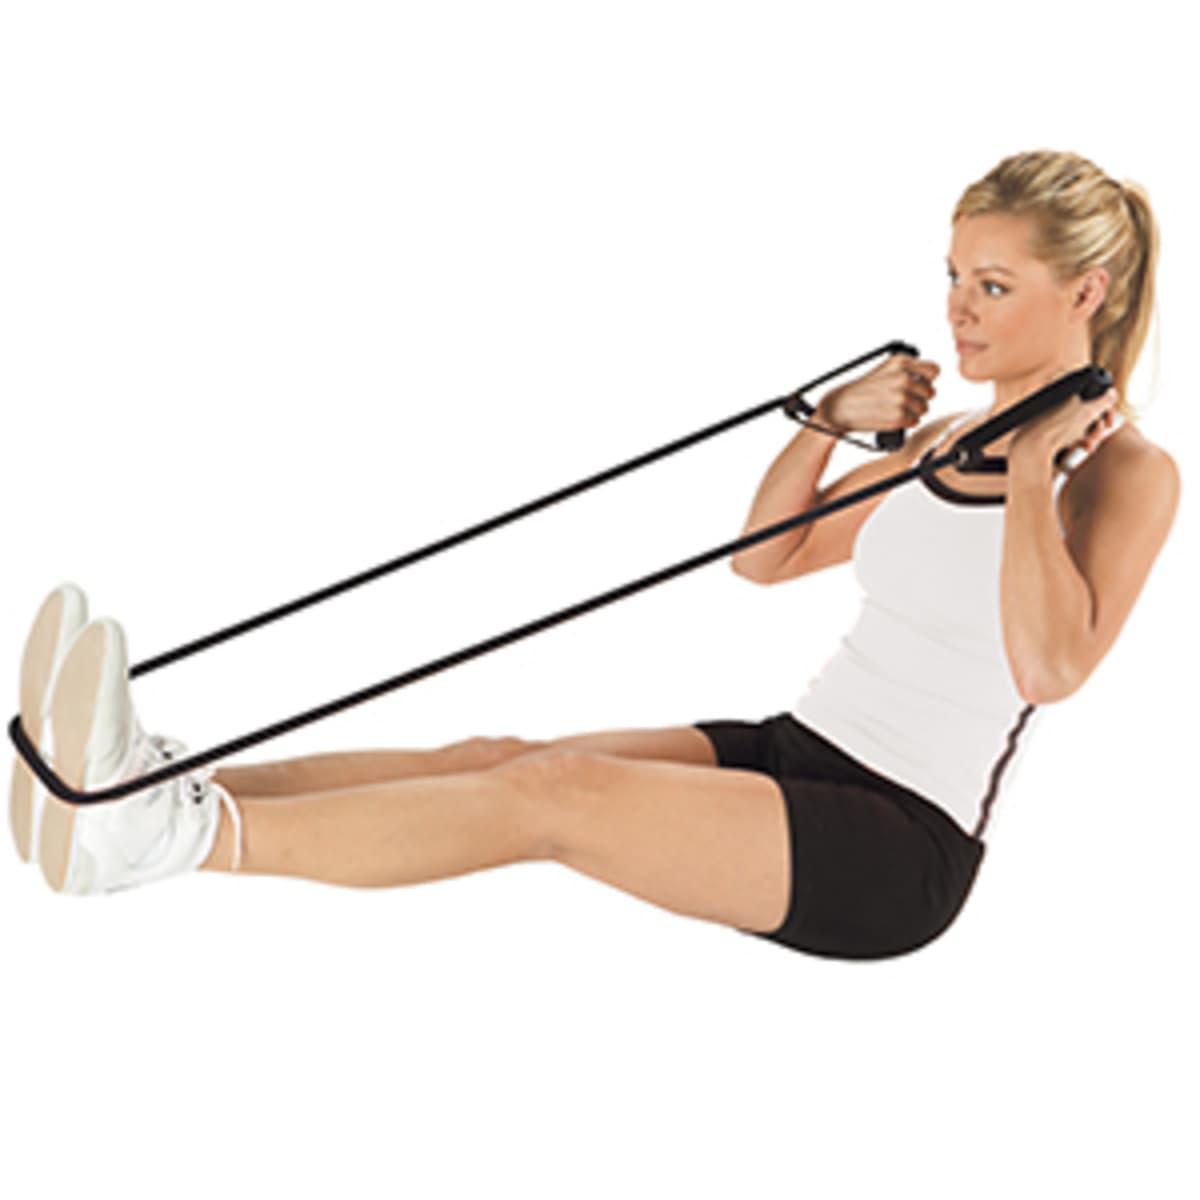 Resistance Band Exercise Posters and What To Look for When Buying Exercise  Bands - Buy Online - HubPages